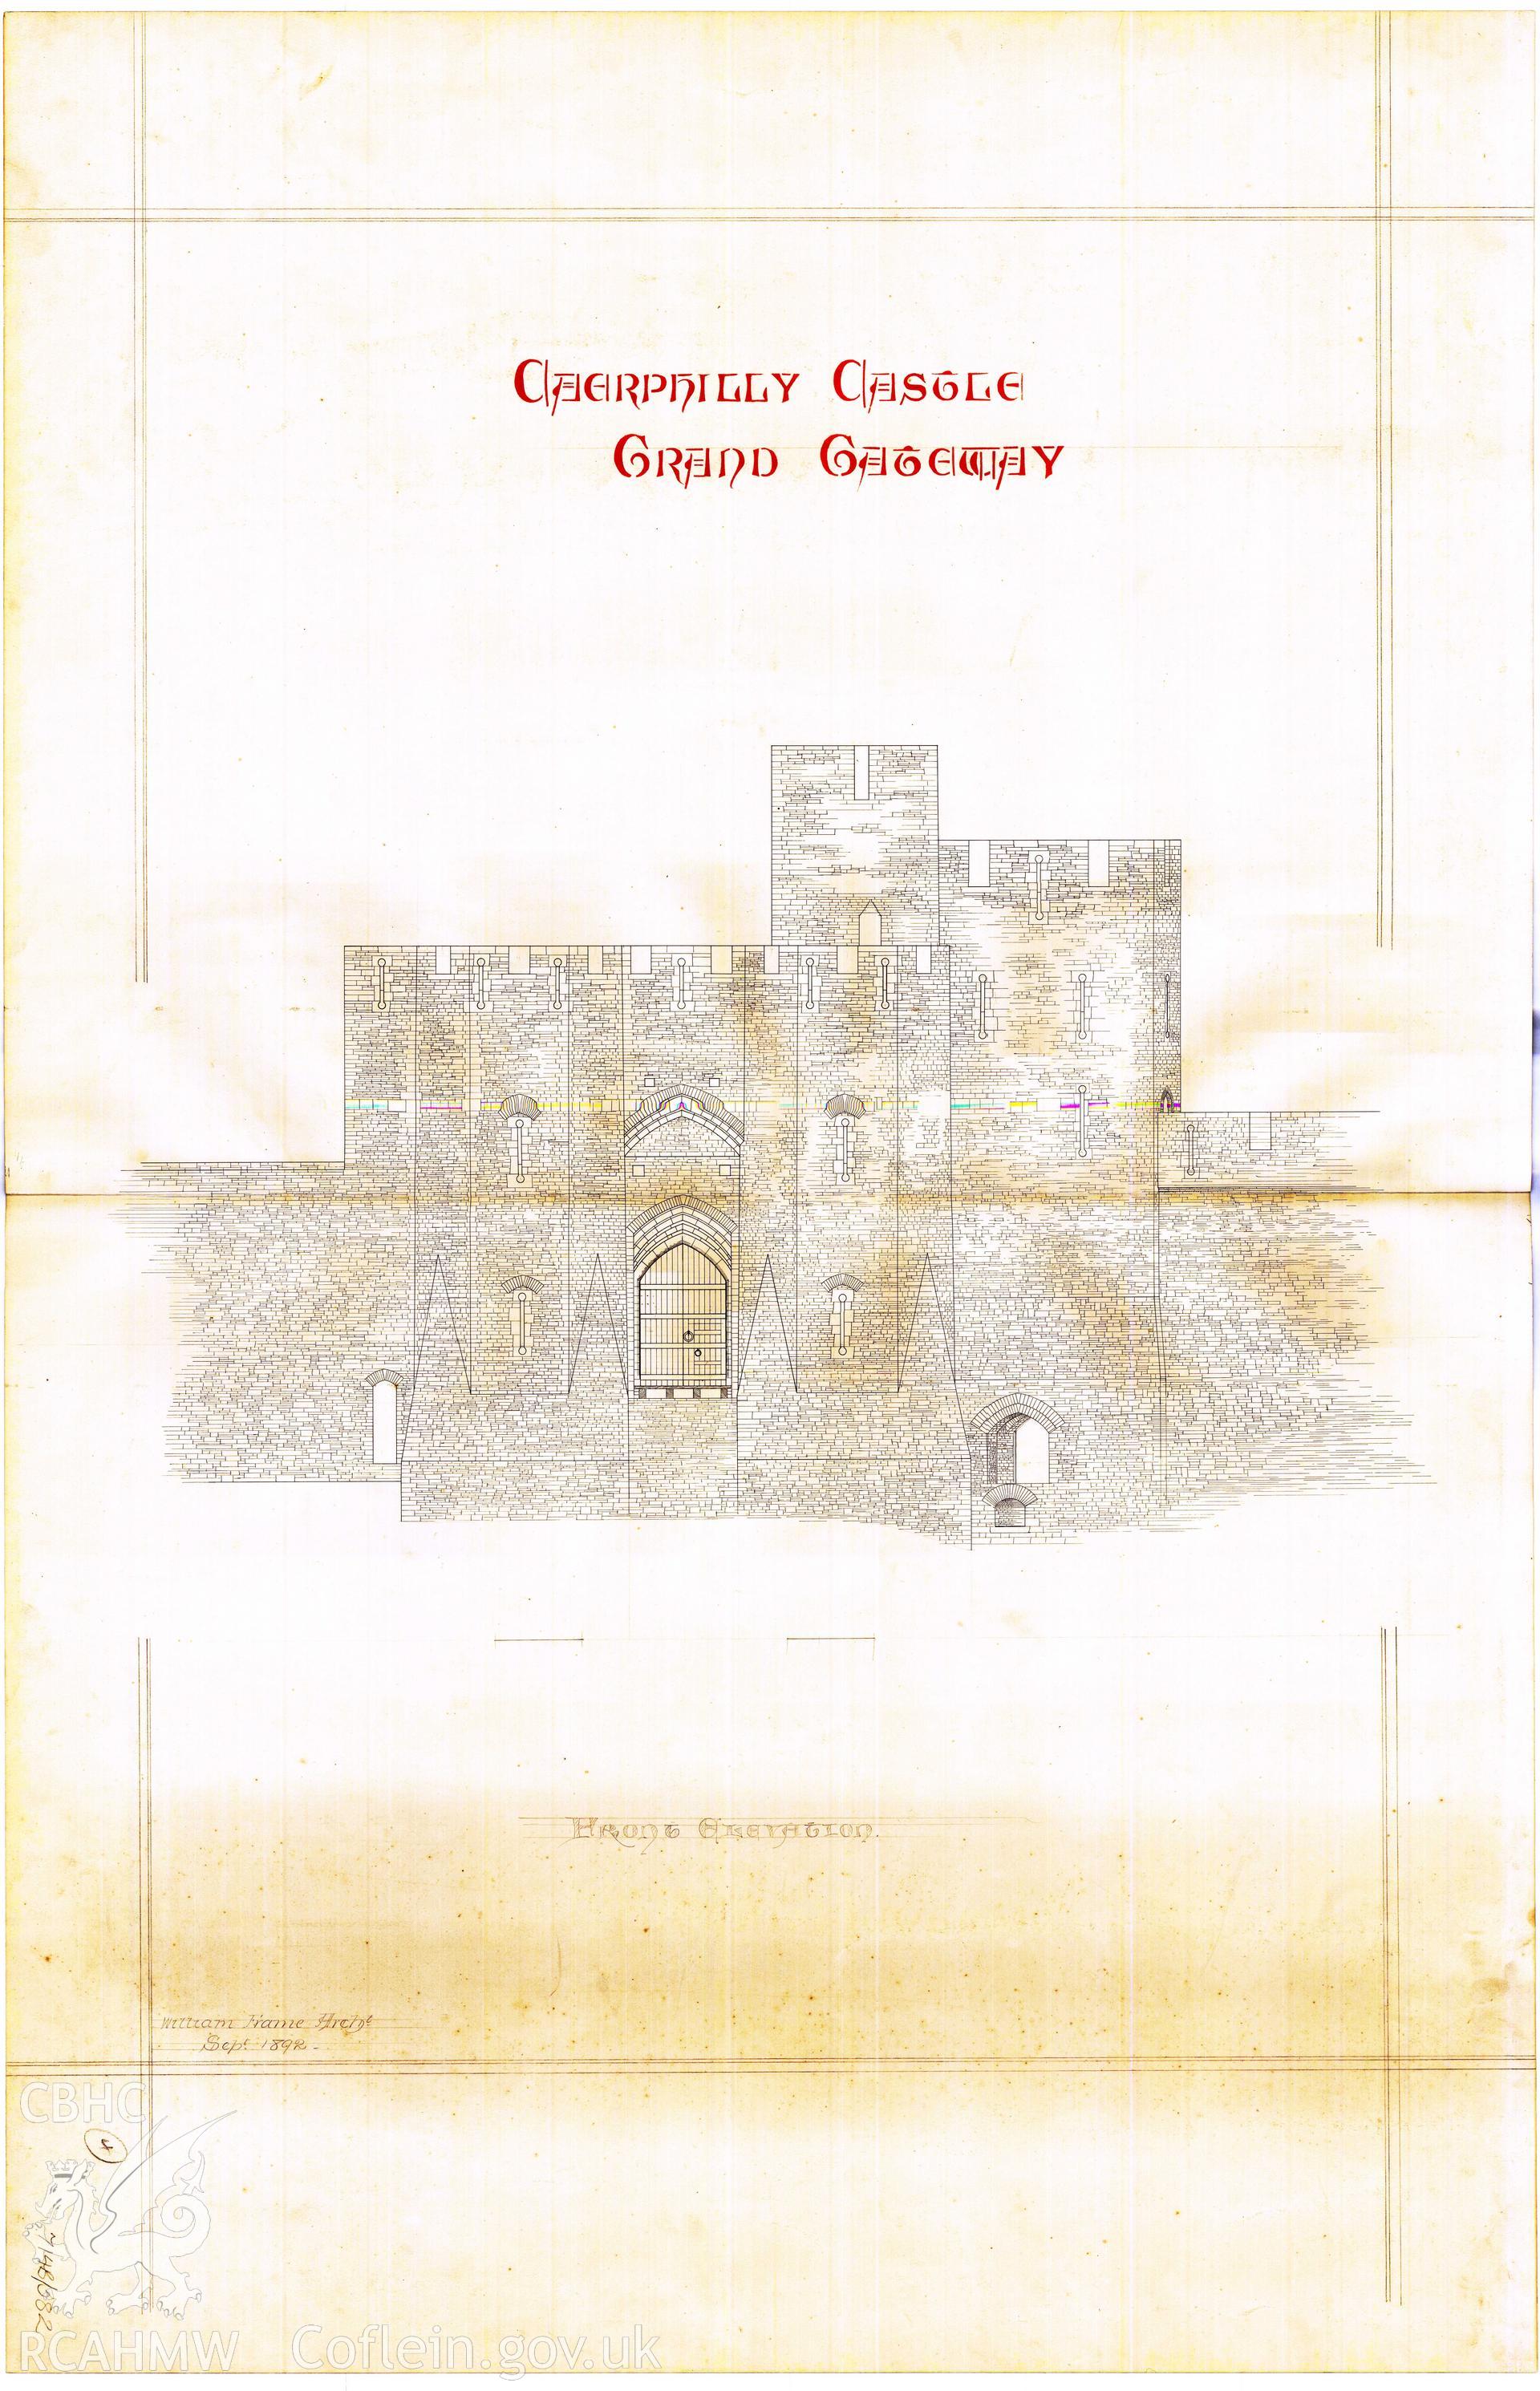 Cadw guardianship monument drawing of Caerphilly Castle. Grand Gateway Elevations. Cadw Ref. No:714B/382. Scale 1:96.